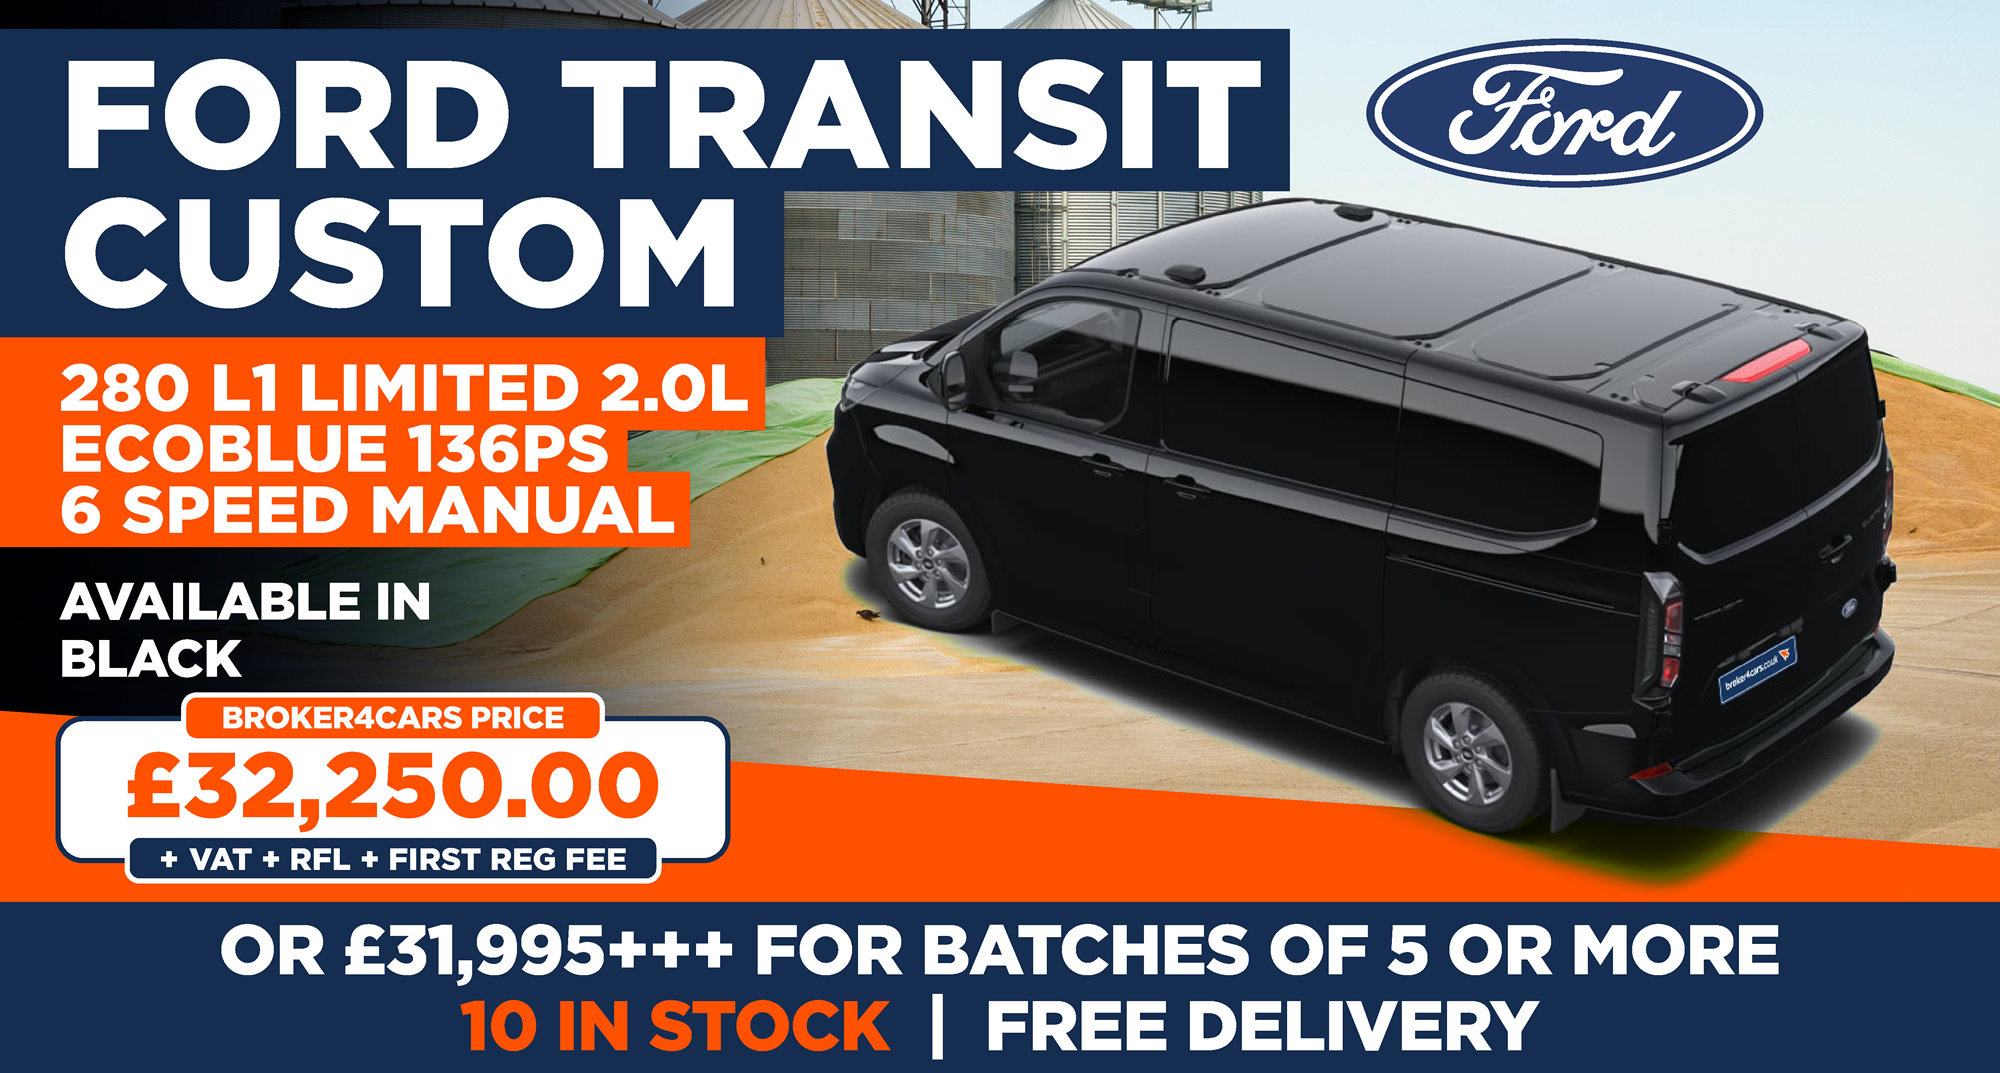 FORD TRANSIT CUSTOM 280 L1 Limited 2.0l EcoBlue 136ps 6 speed manual BlackALL IN STOCK WITH FREE DELIVERY. 10 in Stock. All above prices are + VAT + RFL + 1st Reg Fee